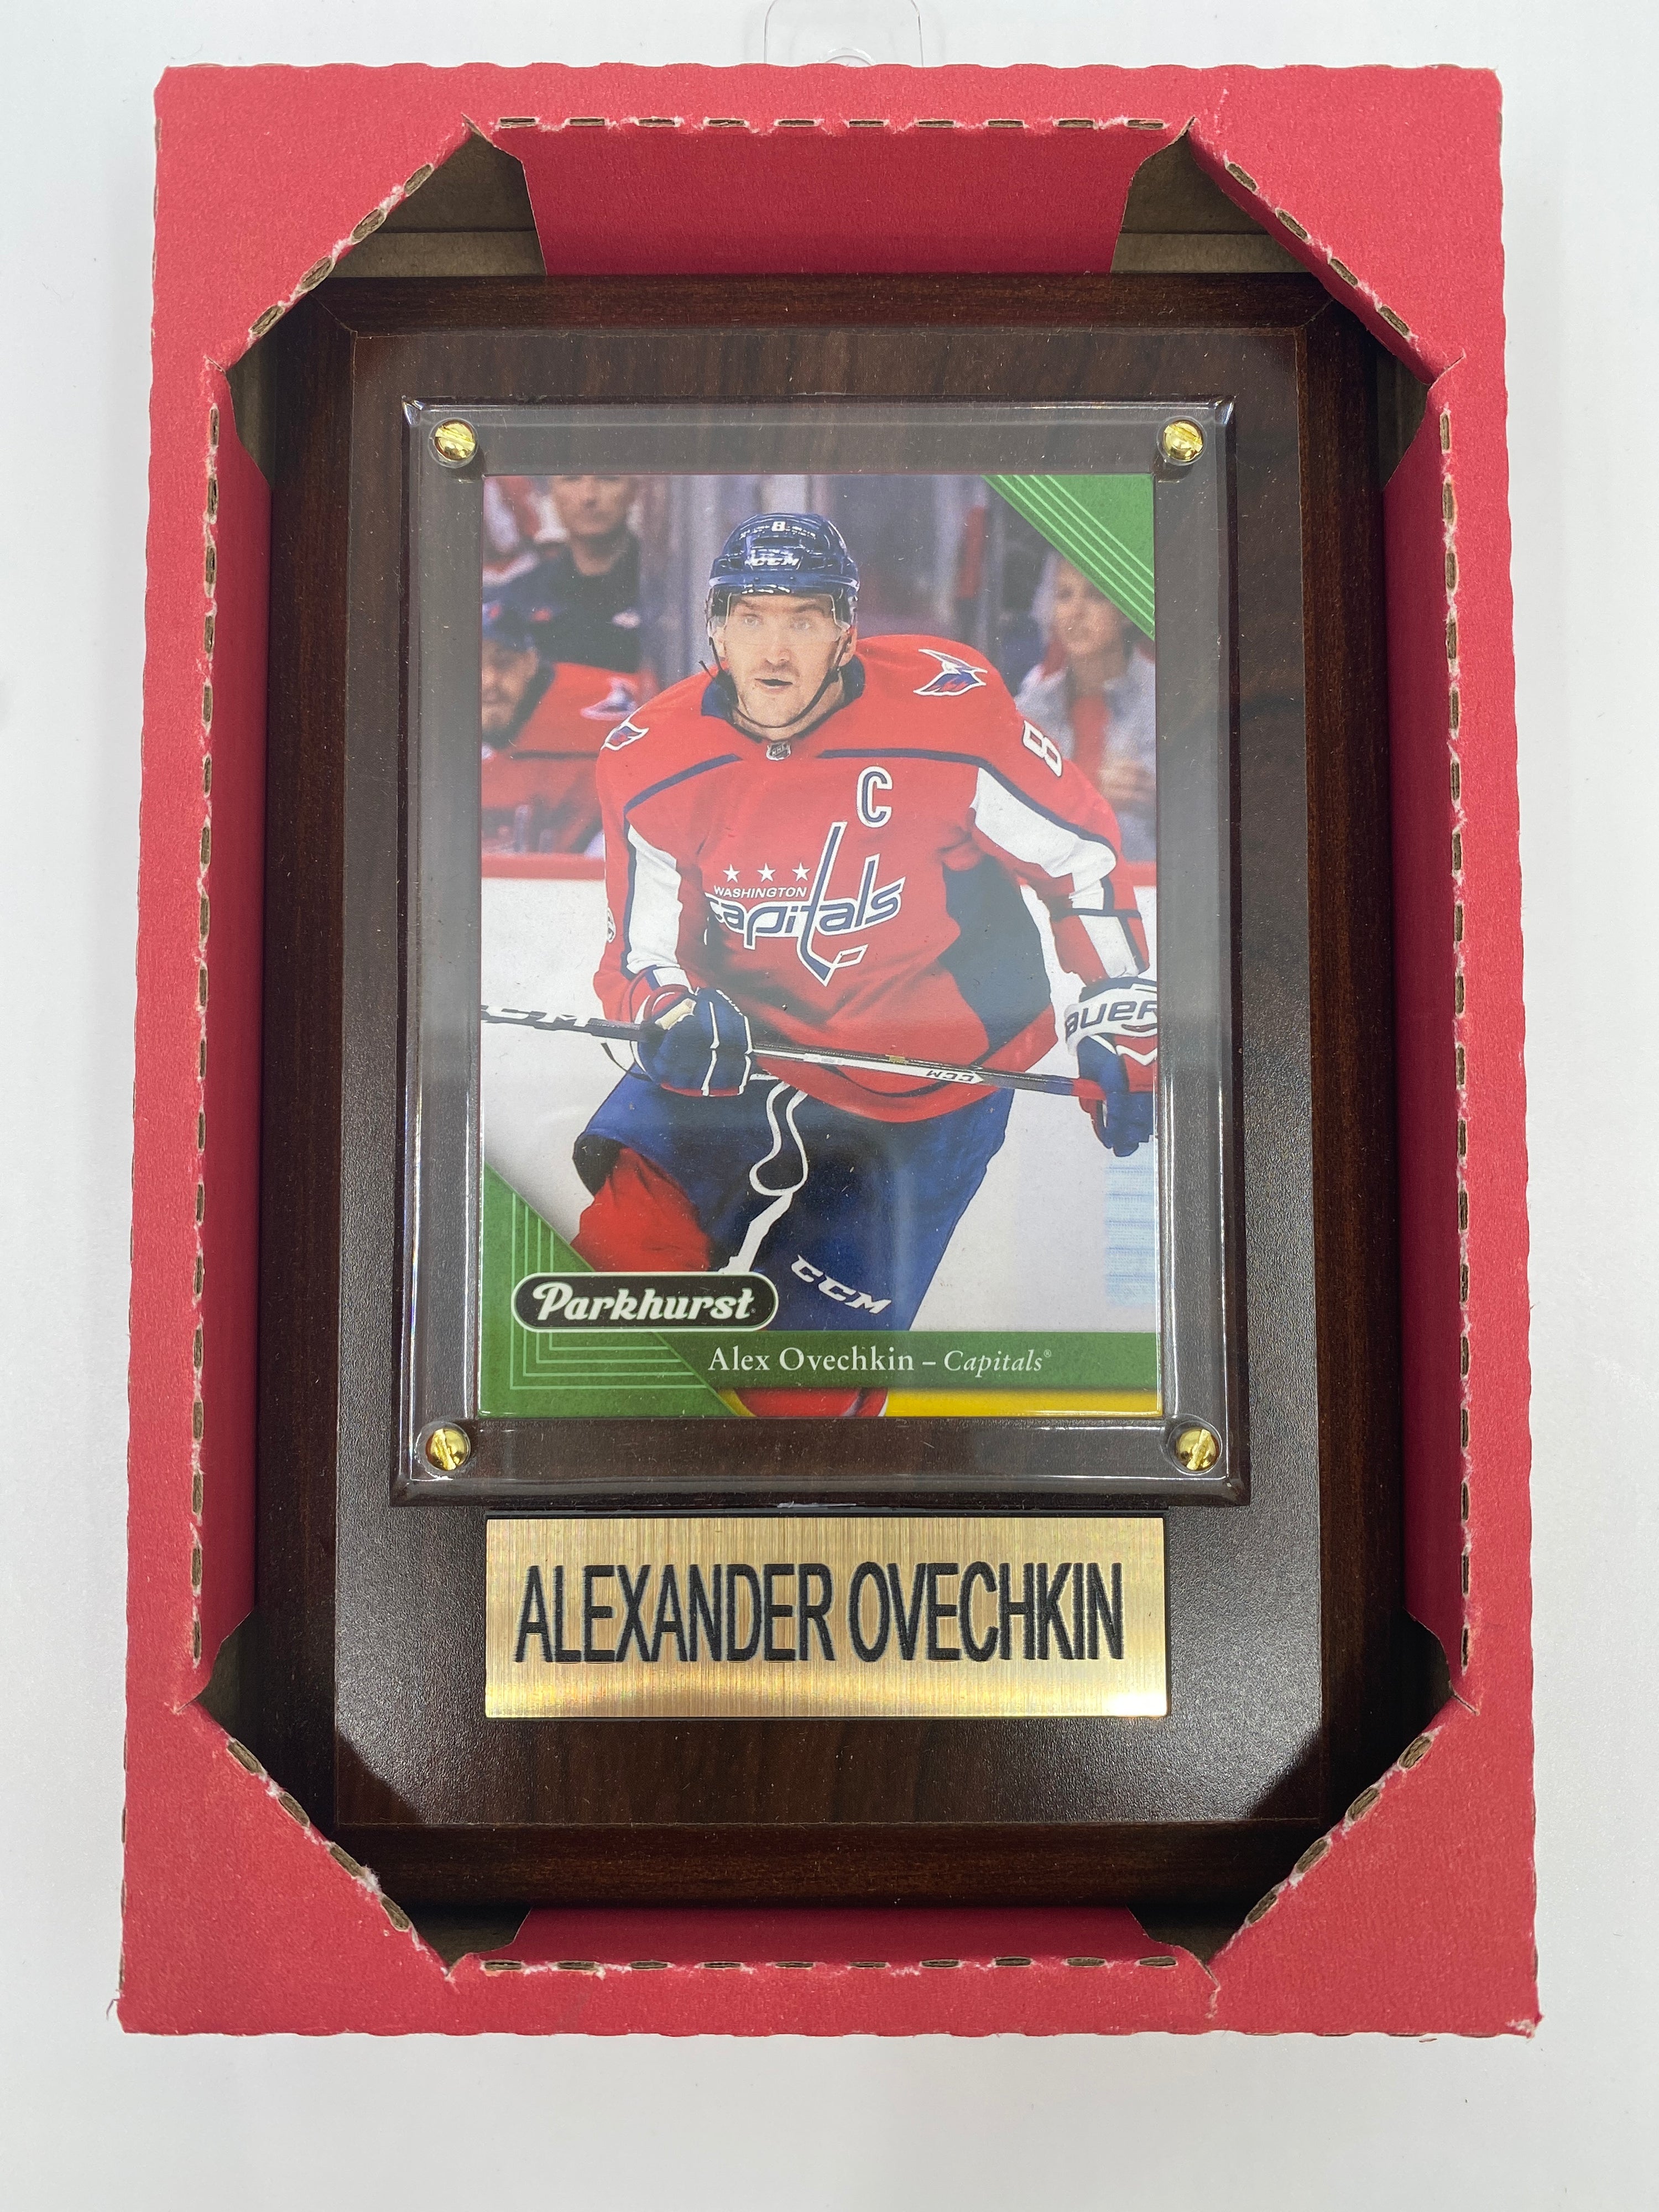 NHL Plaque with card 4x6 Capitols Alexander Ovechkin